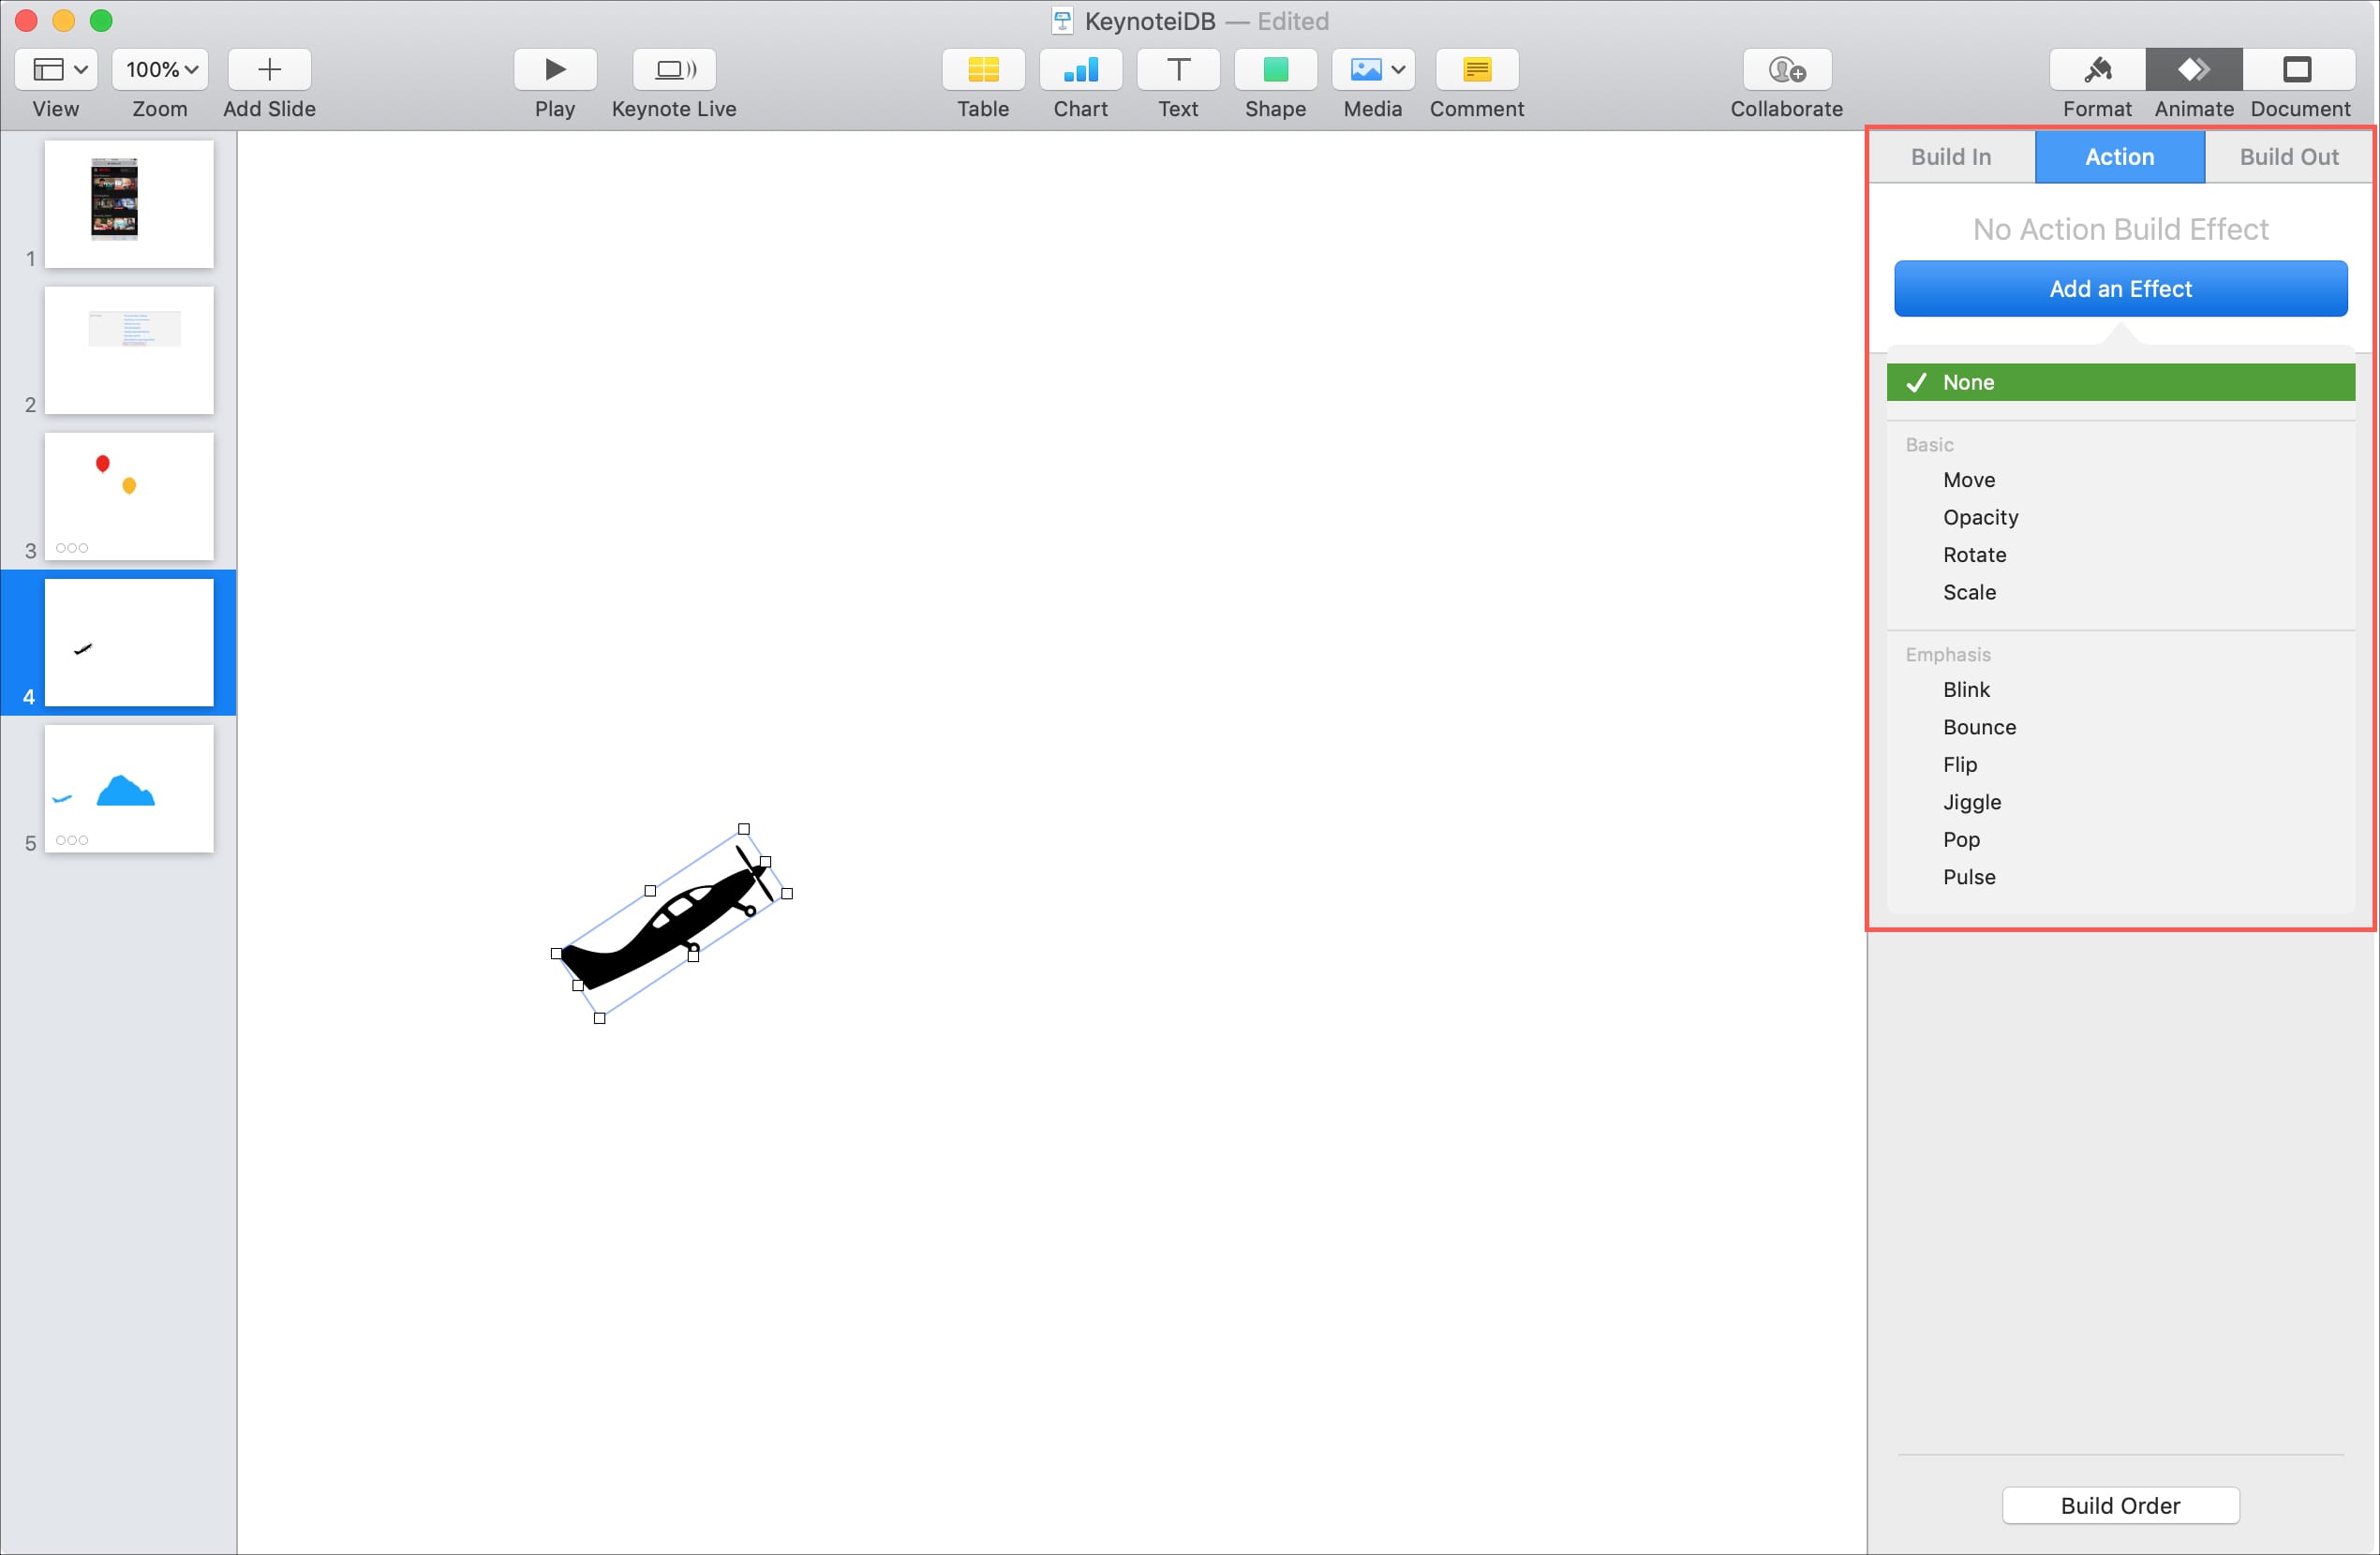 How to animate objects on a slide in Keynote on Mac